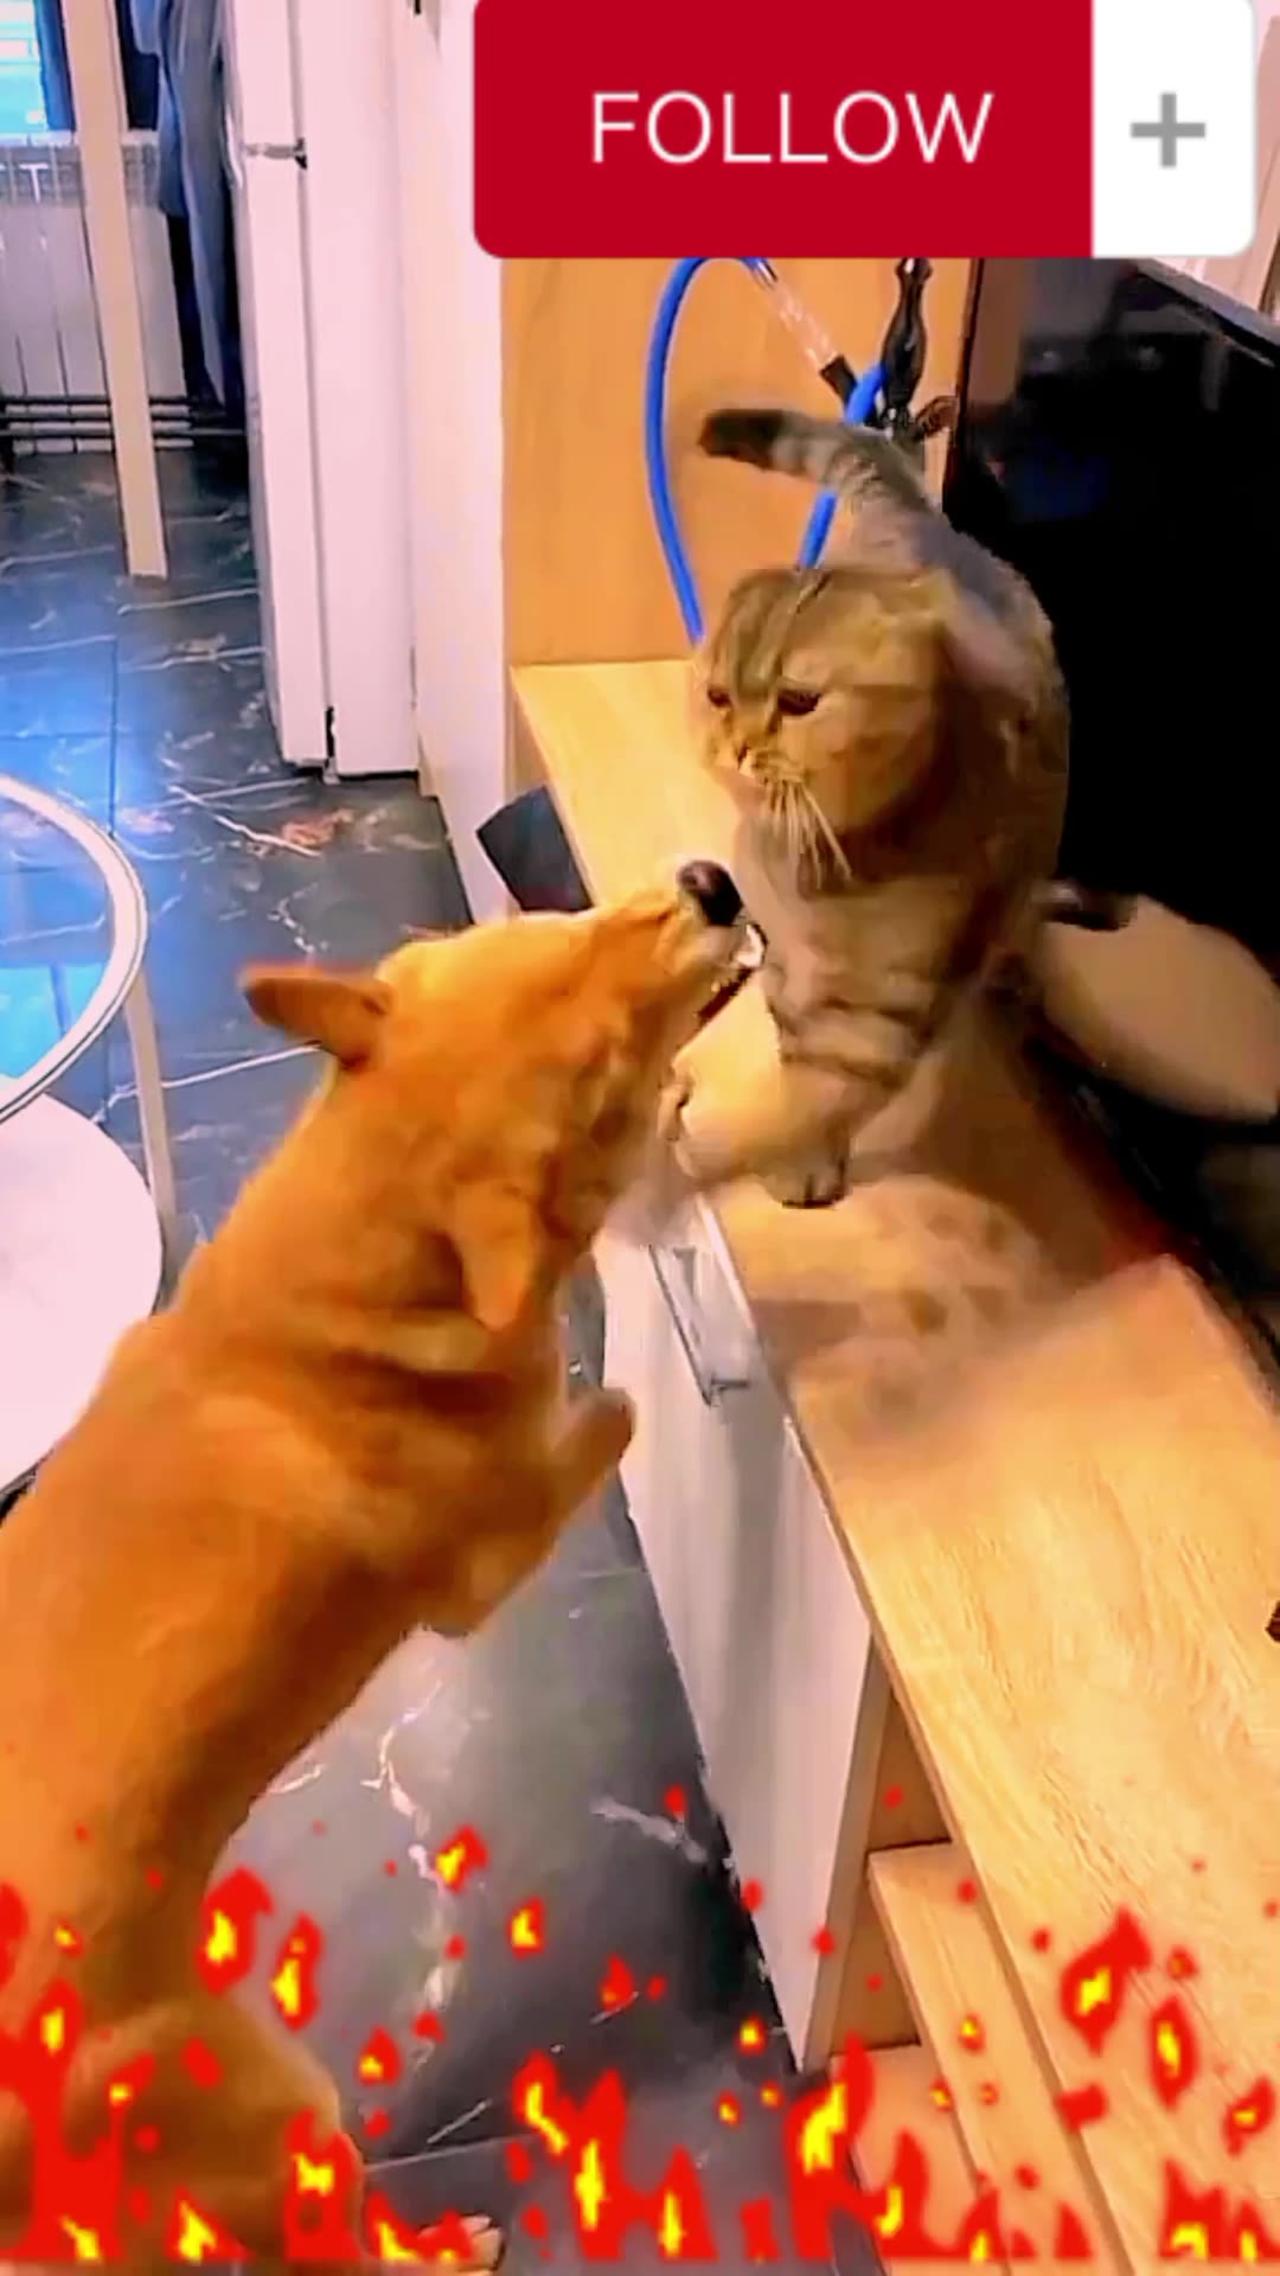 Fight between dog🐕 vs Cat🐈. Fully Entertaining Video! #rumble #fun #funny #animal